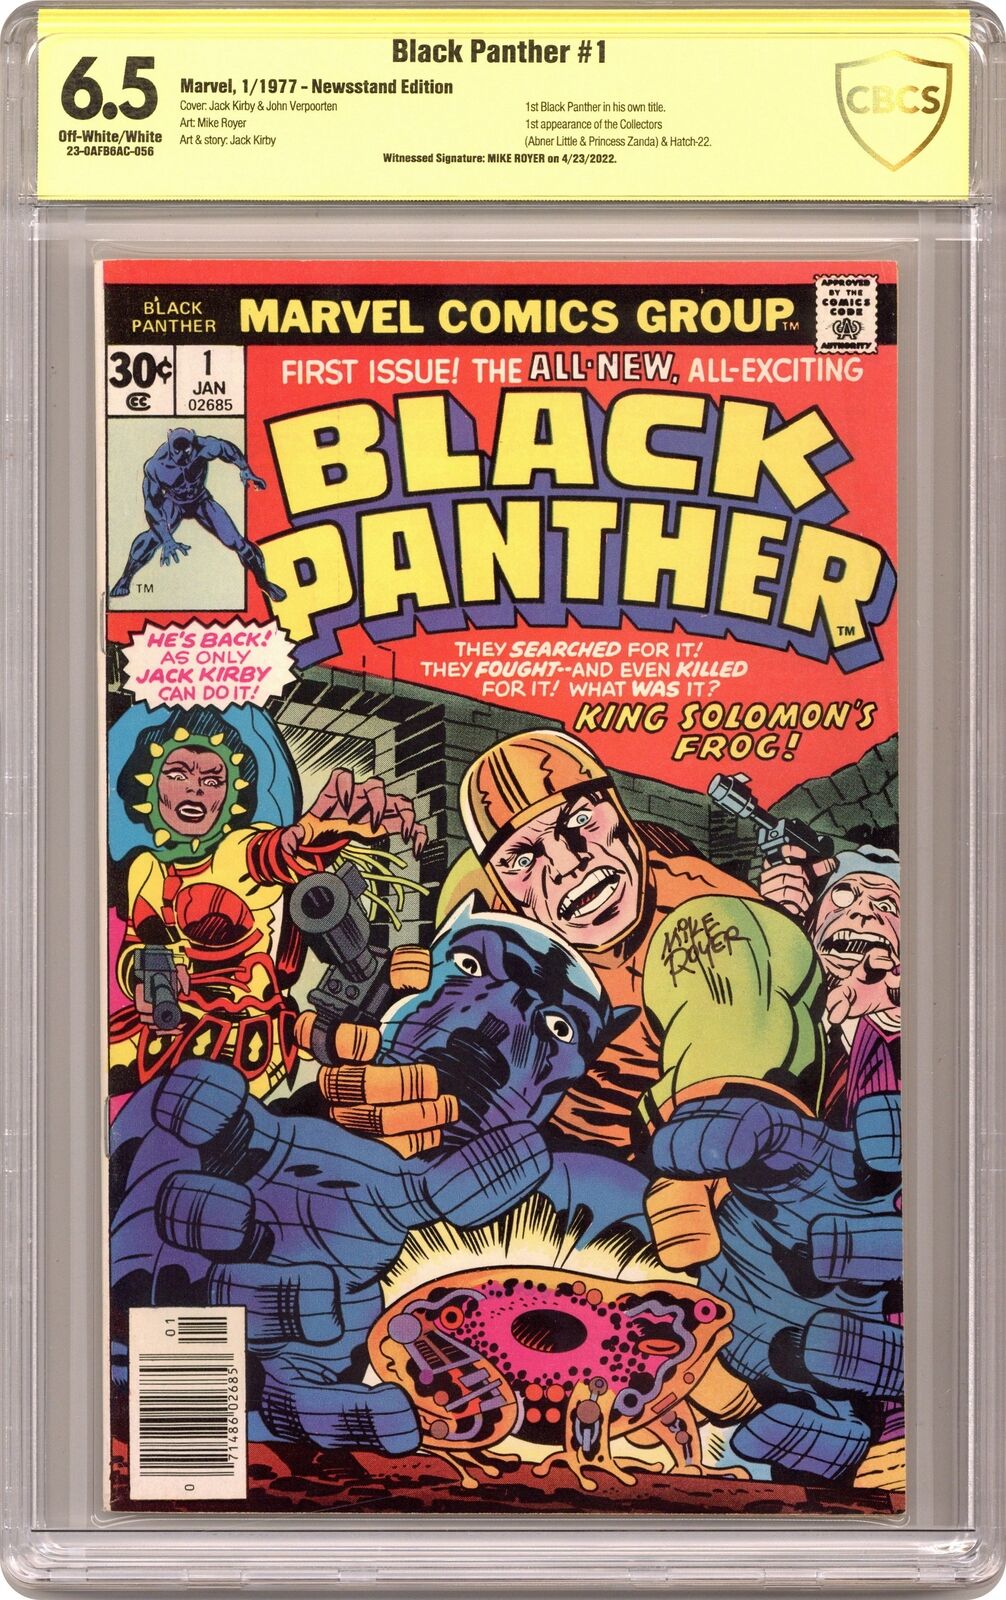 Black Panther #1 CBCS 6.5 Newsstand SS Mike Royer 1977 23-0AFB6AC-056